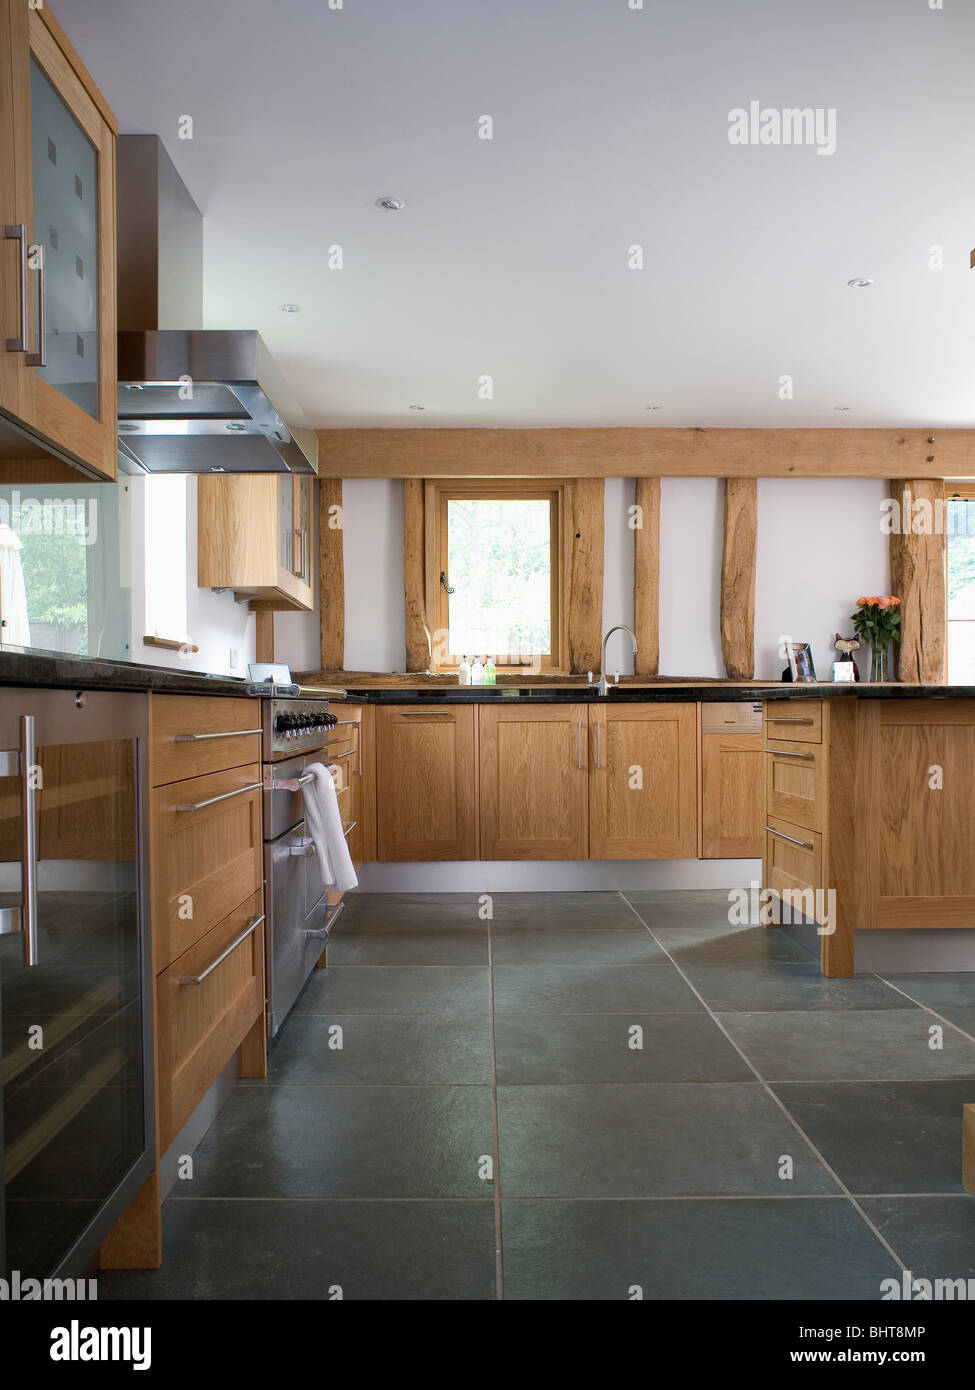 Slate Flooring In Large Modern Country Kitchen With Pale Wood